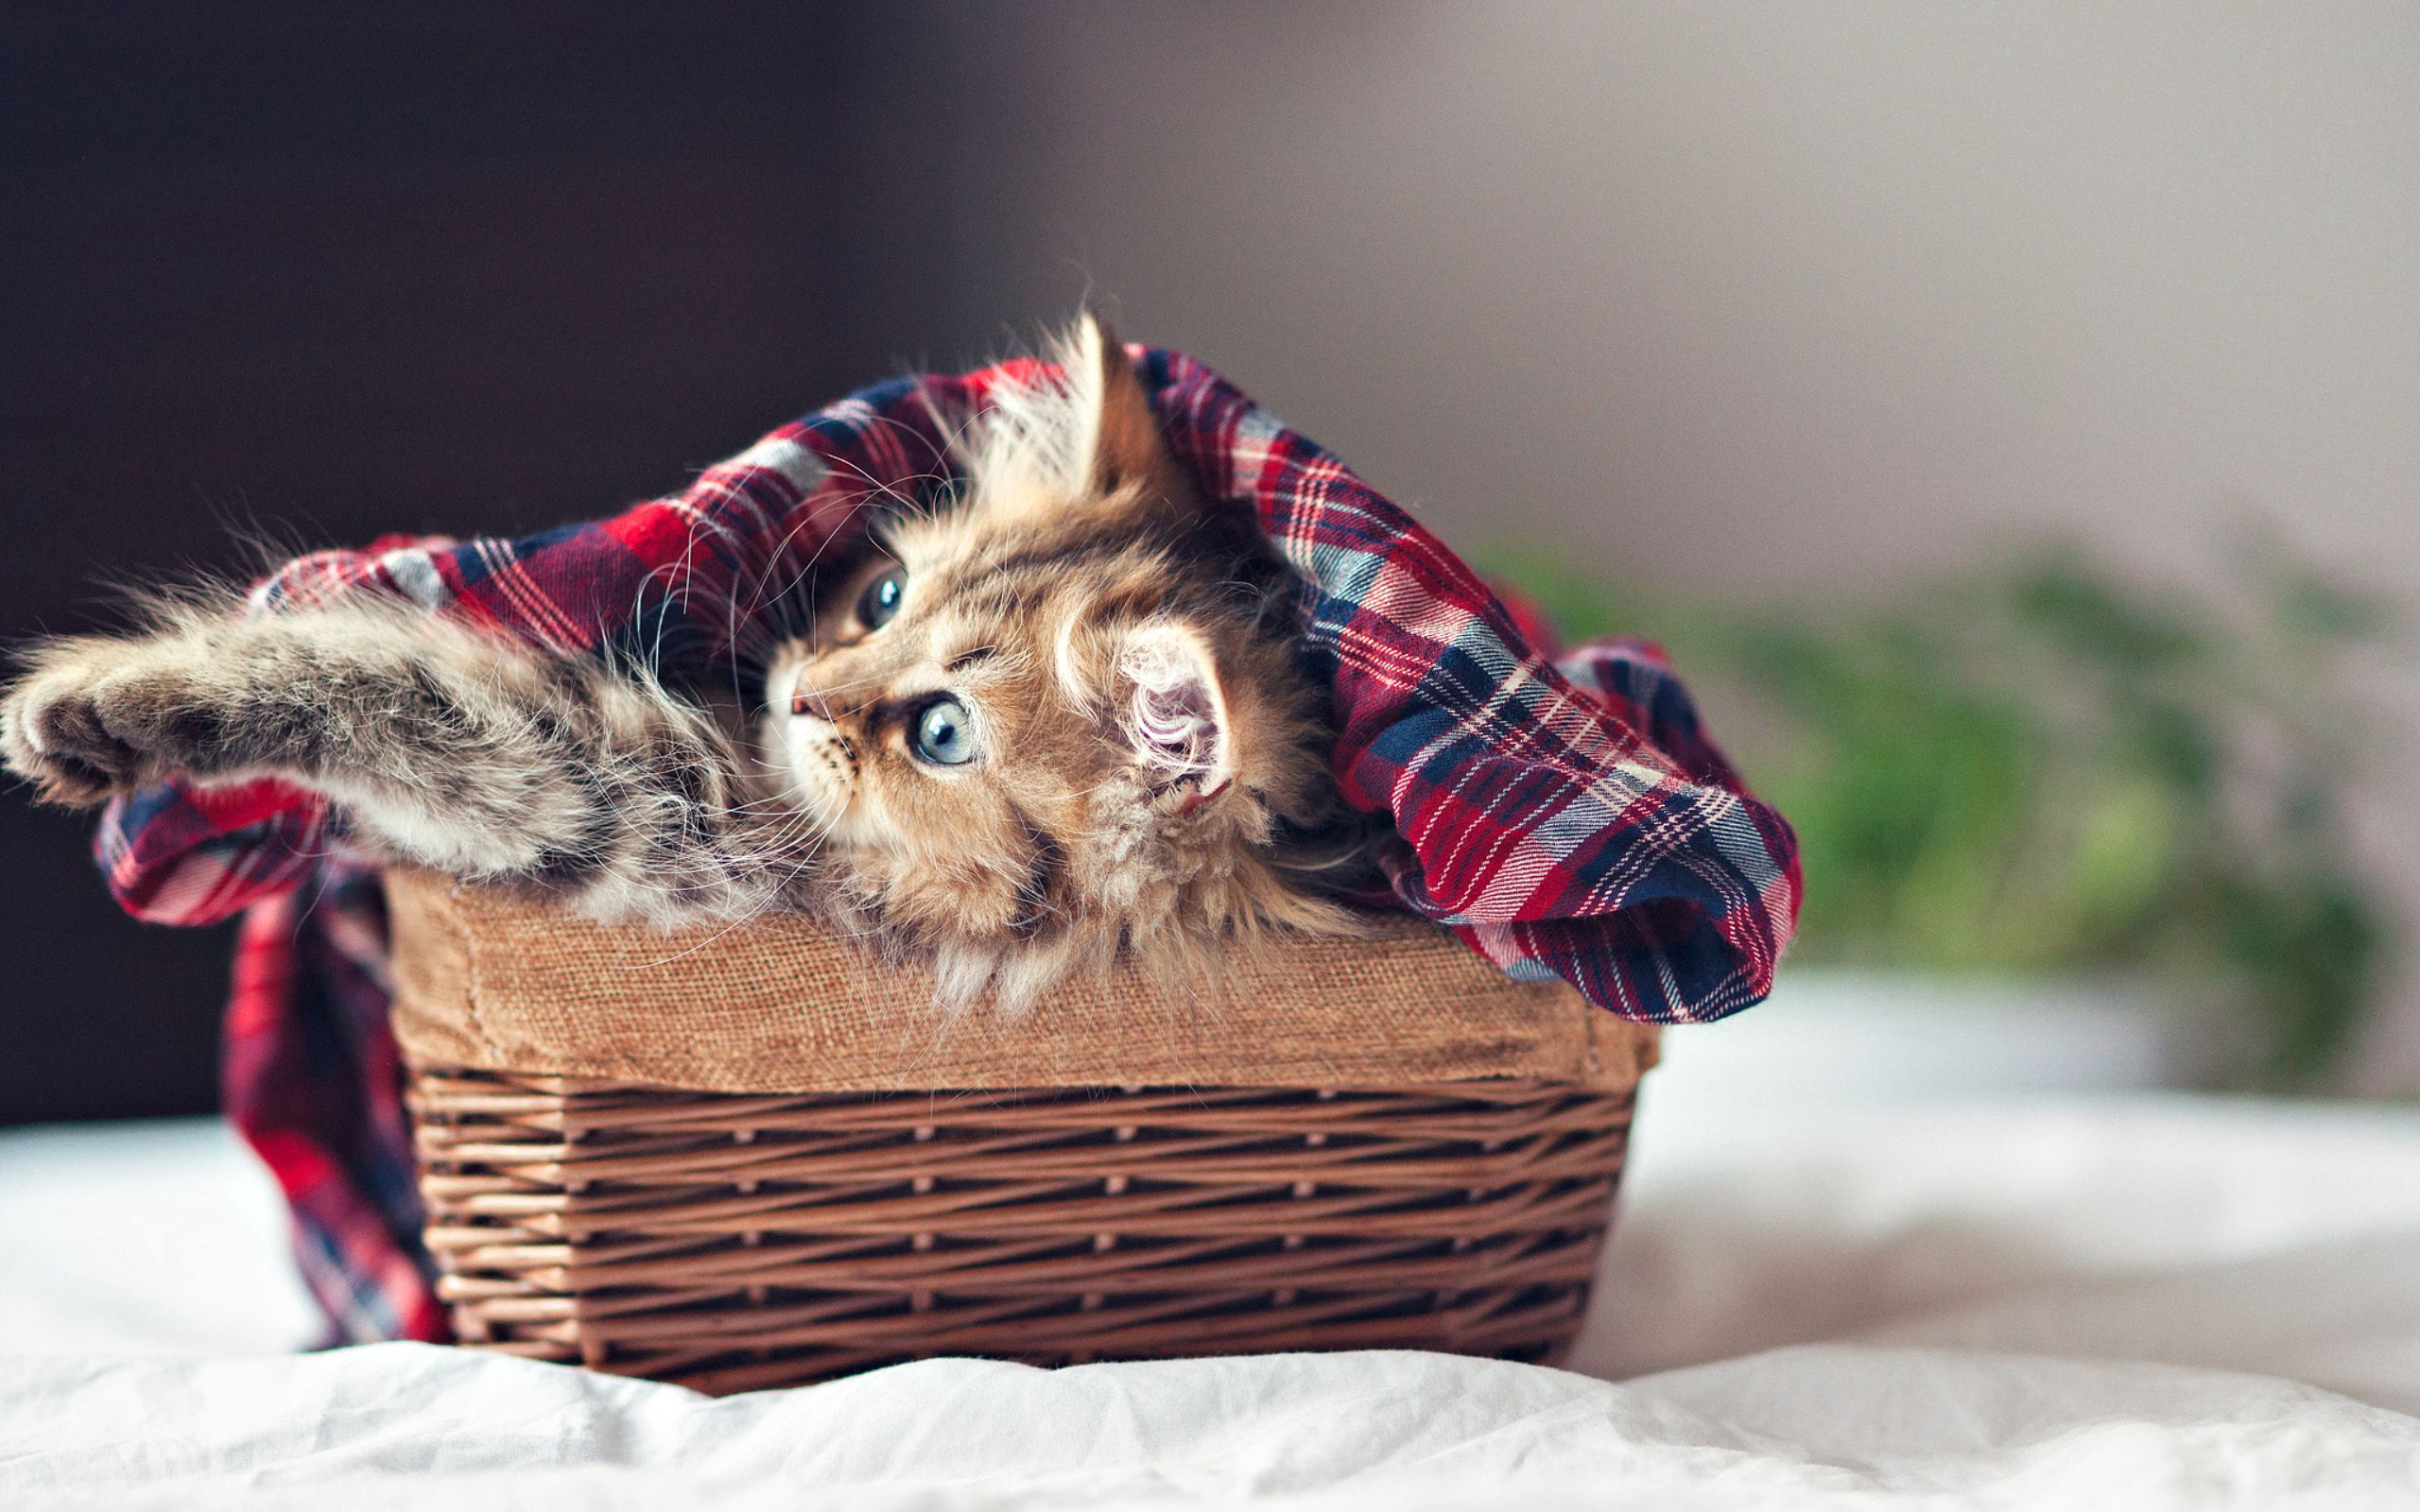 101834 3840x2160 PC pictures for free, download kitten, kitty, plaid, fluffy 3840x2160 wallpapers on your desktop